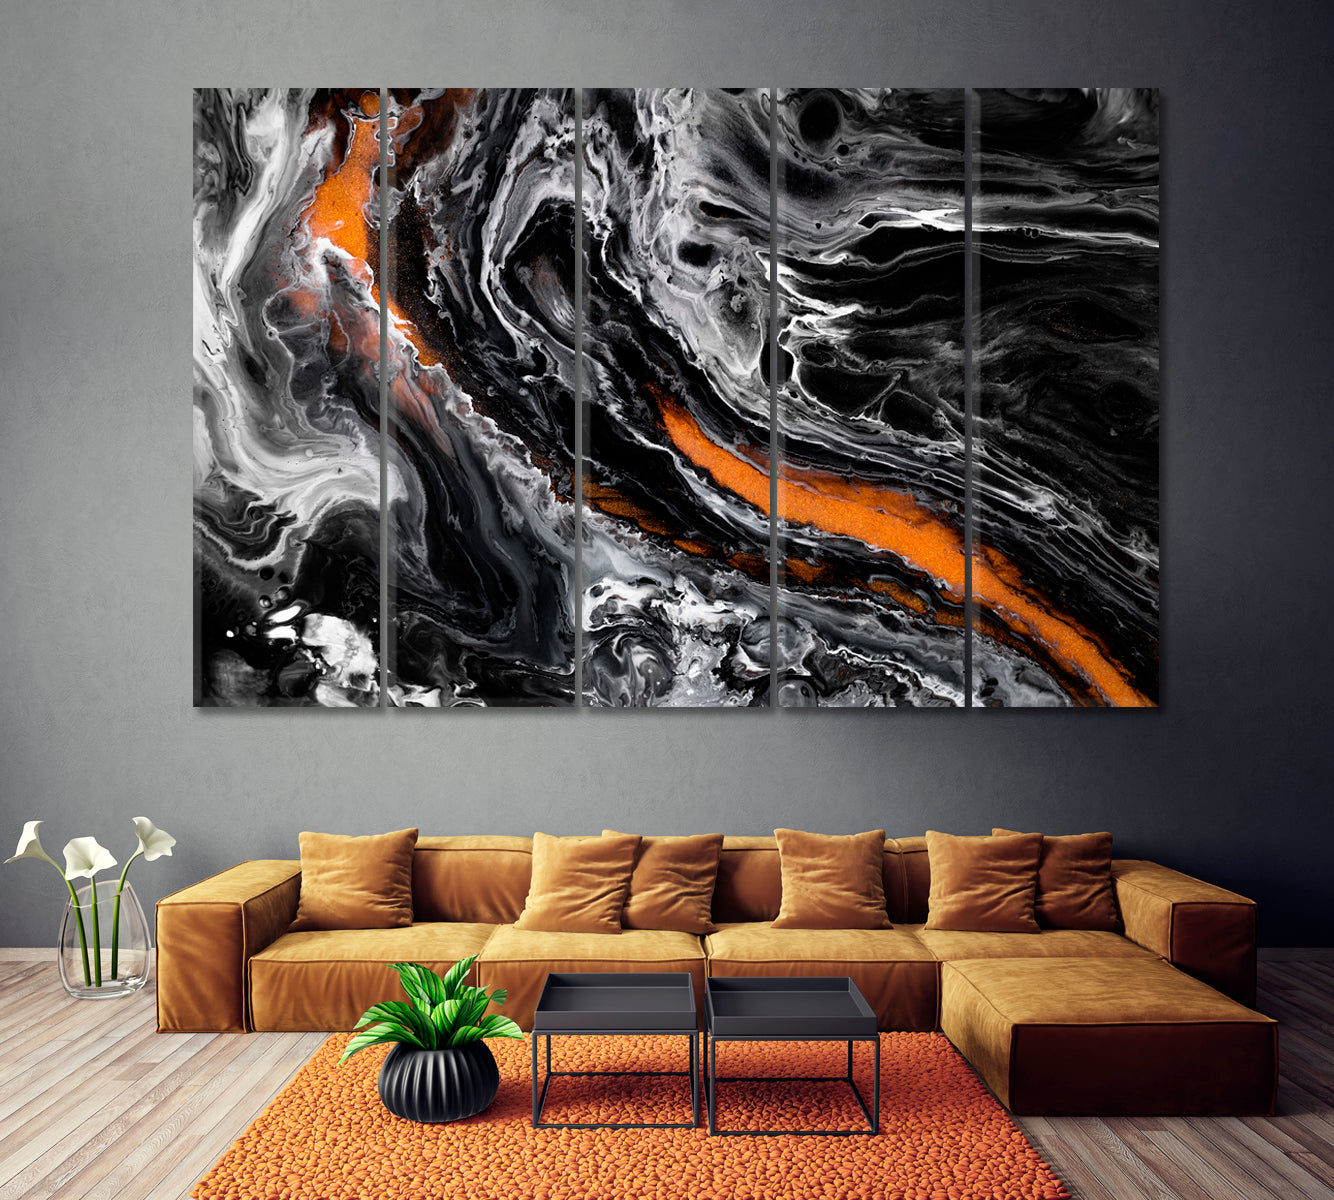 Abstract Liquid Acrylic Black Pattern Canvas Print ArtLexy 5 Panels 36"x24" inches 